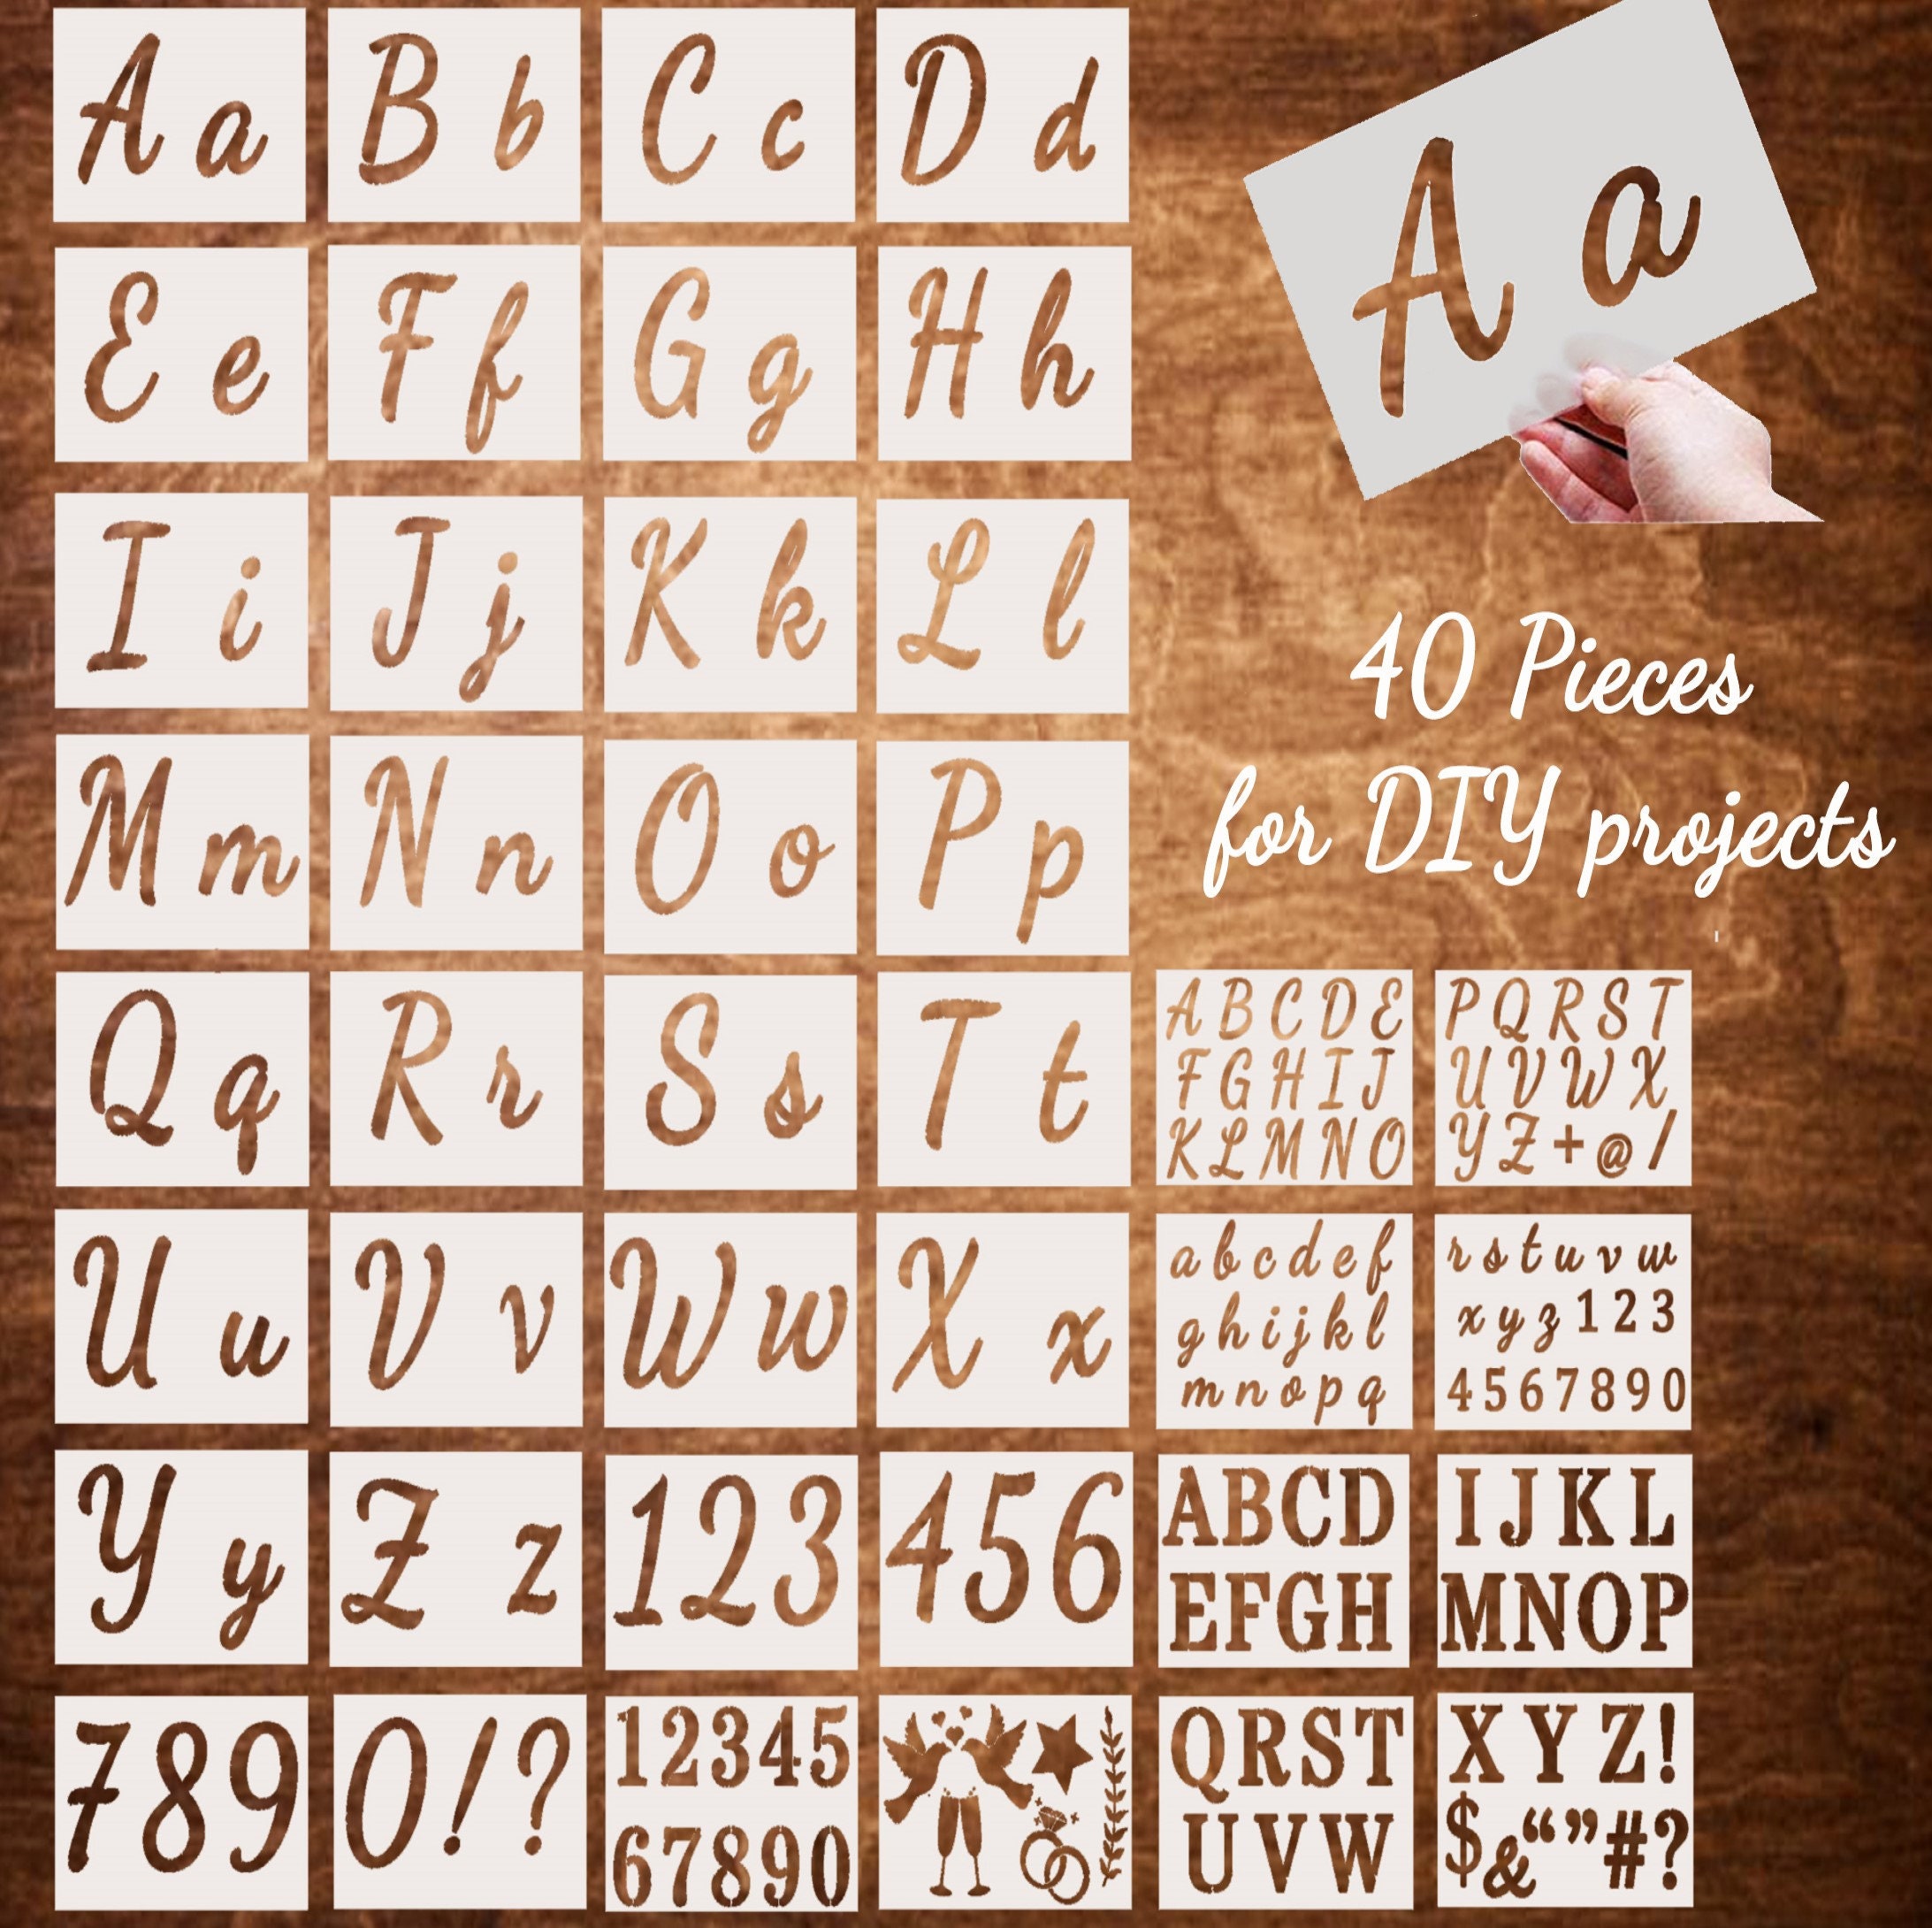 Letter Stencils for Painting on Wood Alphabet Stencils Number Stencils 3  Inch Large Letter Stencils Spray Paint Stencil Small Letter 